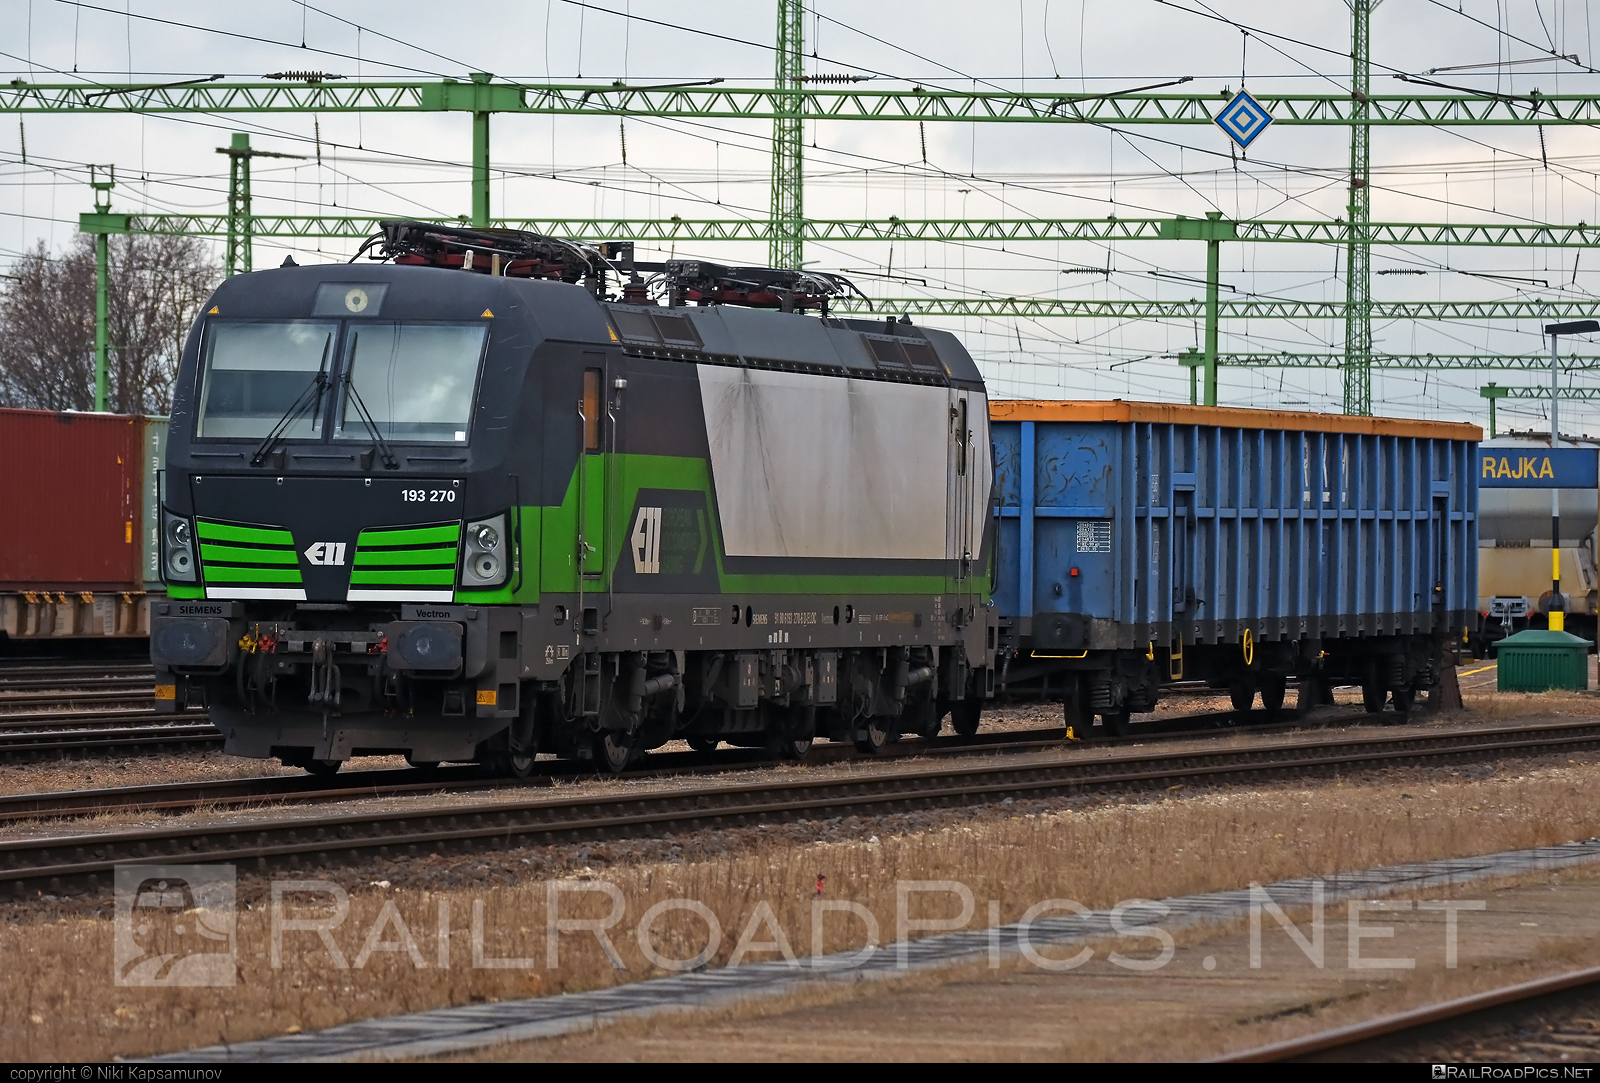 Siemens Vectron MS - 193 270 operated by LTE Logistik und Transport GmbH #ell #ellgermany #eloc #europeanlocomotiveleasing #lte #ltelogistikundtransport #ltelogistikundtransportgmbh #openwagon #siemens #siemensVectron #siemensVectronMS #vectron #vectronMS